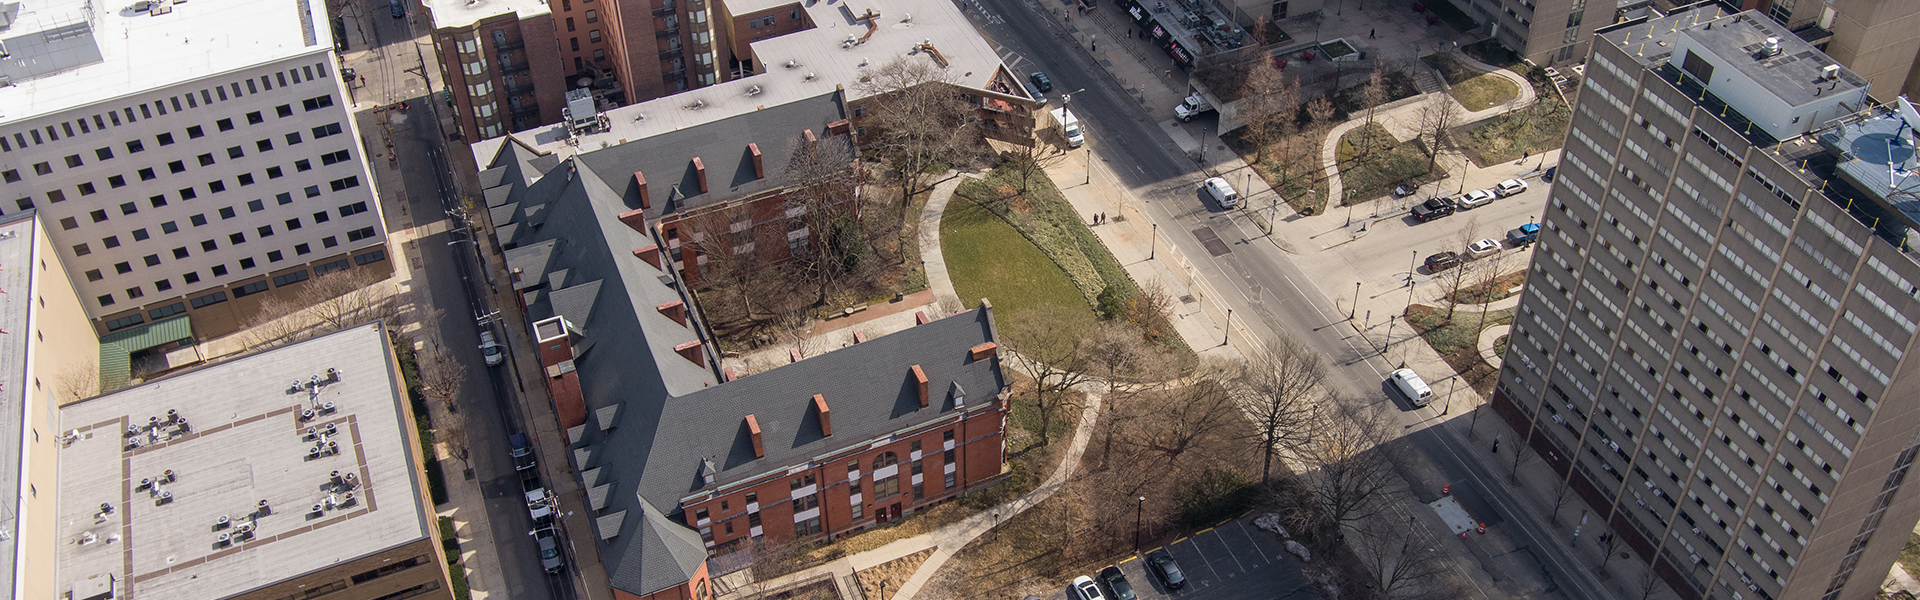 Aerial photo of The Ralston Center's 133-year historic building in the center of the University of Pennsylvania